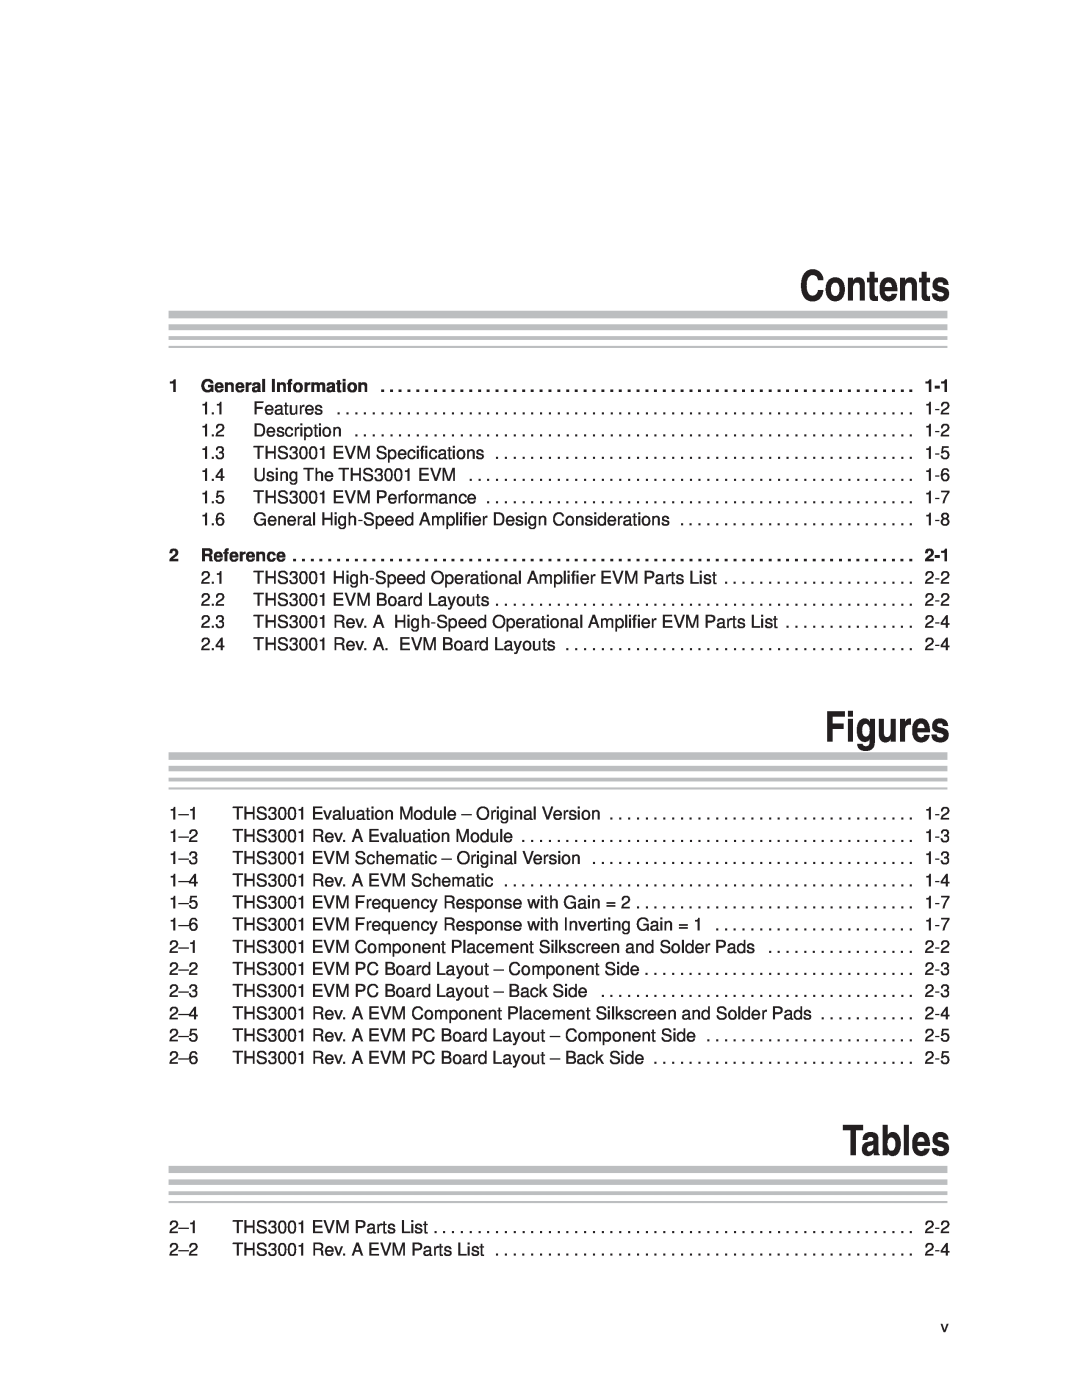 Texas Instruments THS3001 manual Contents, Figures, Tables 